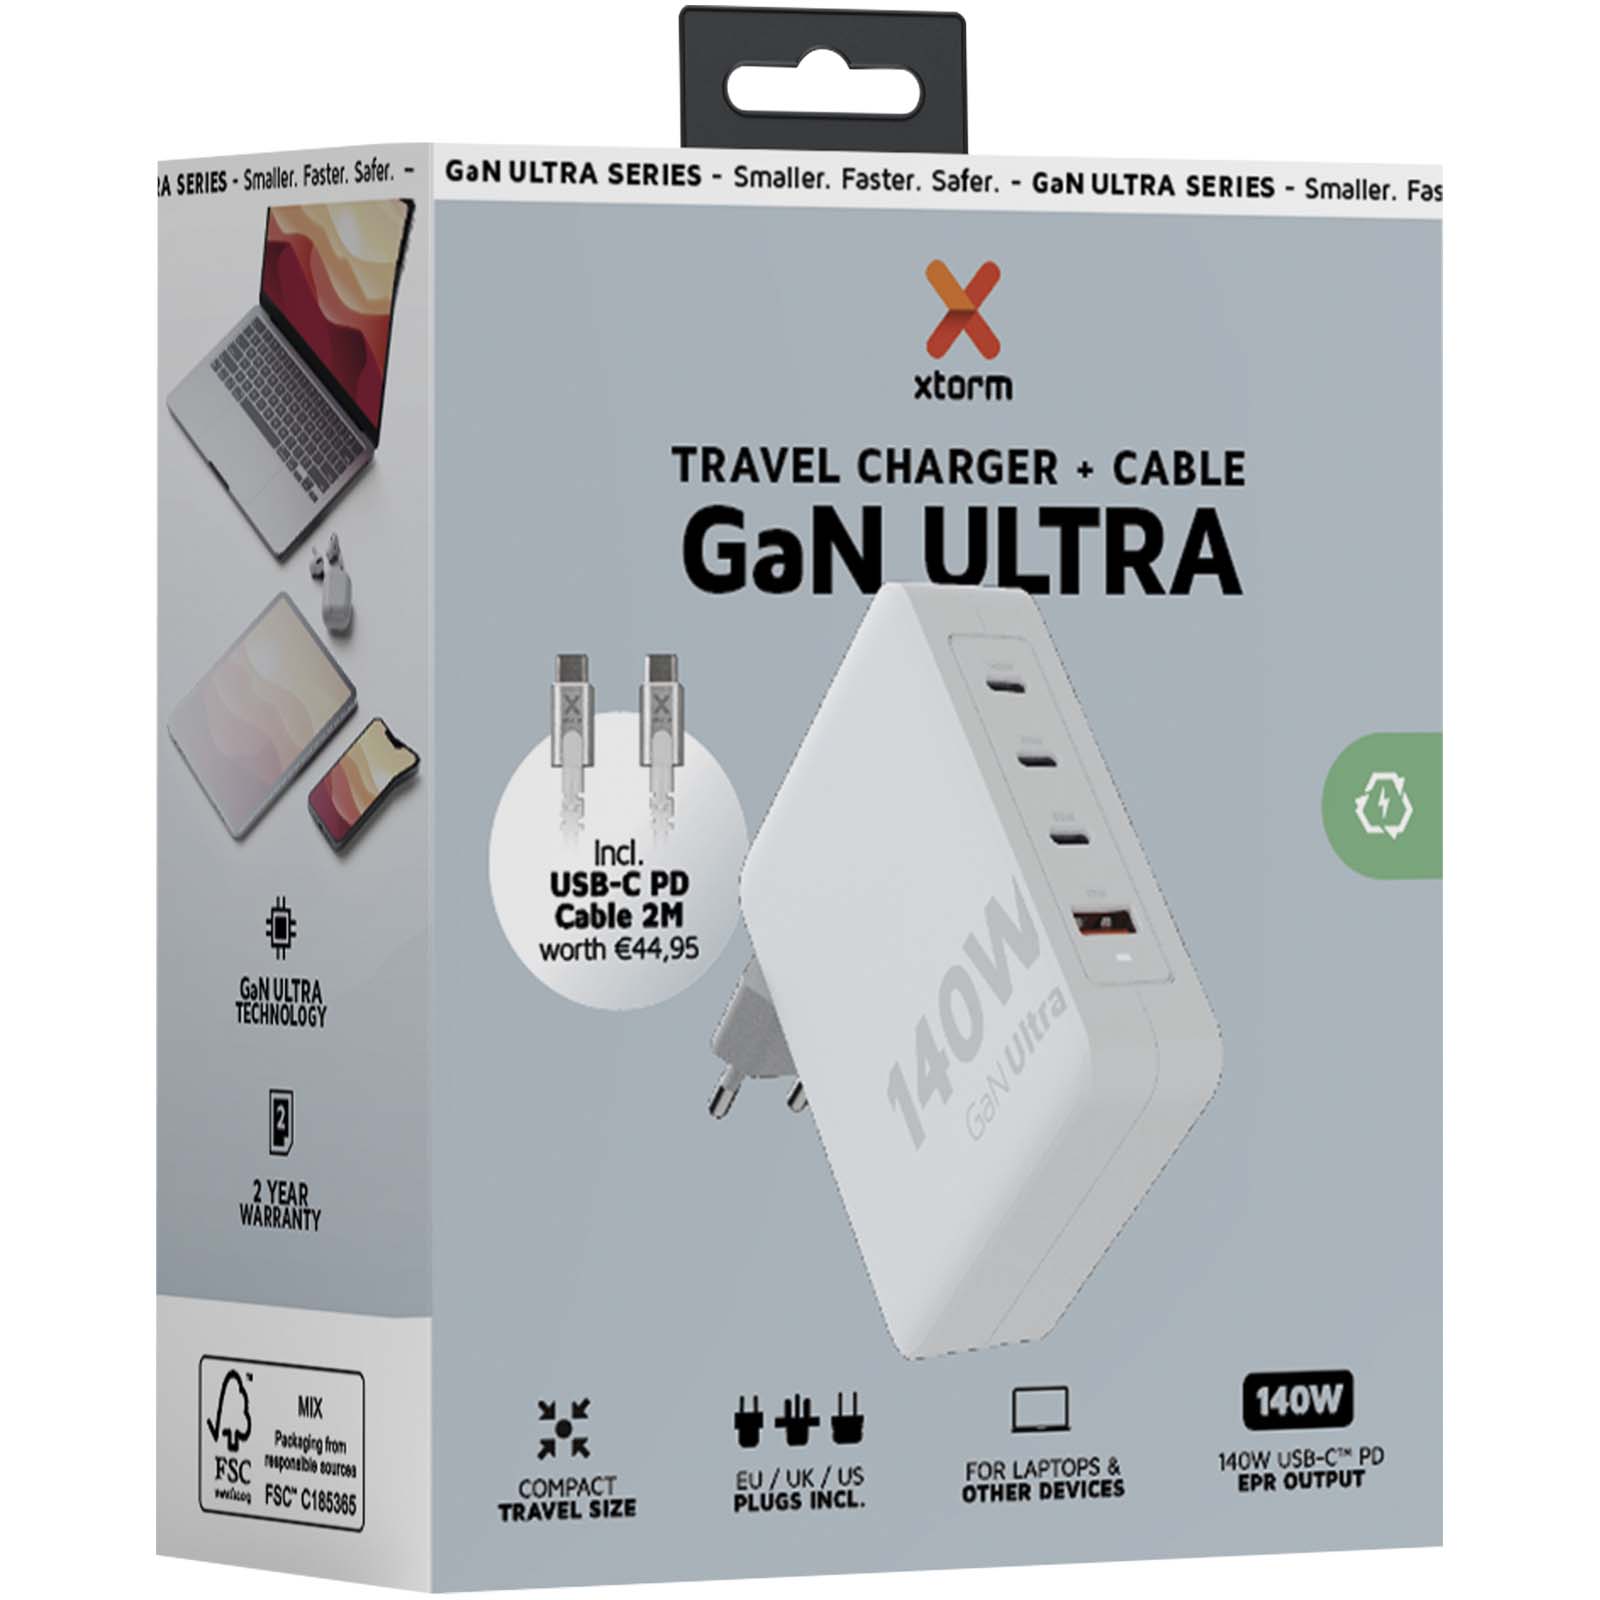 Advertising Chargers - Xtorm XVC2140 GaN Ultra 140W travel charger with 240W USB-C PD cable - 1